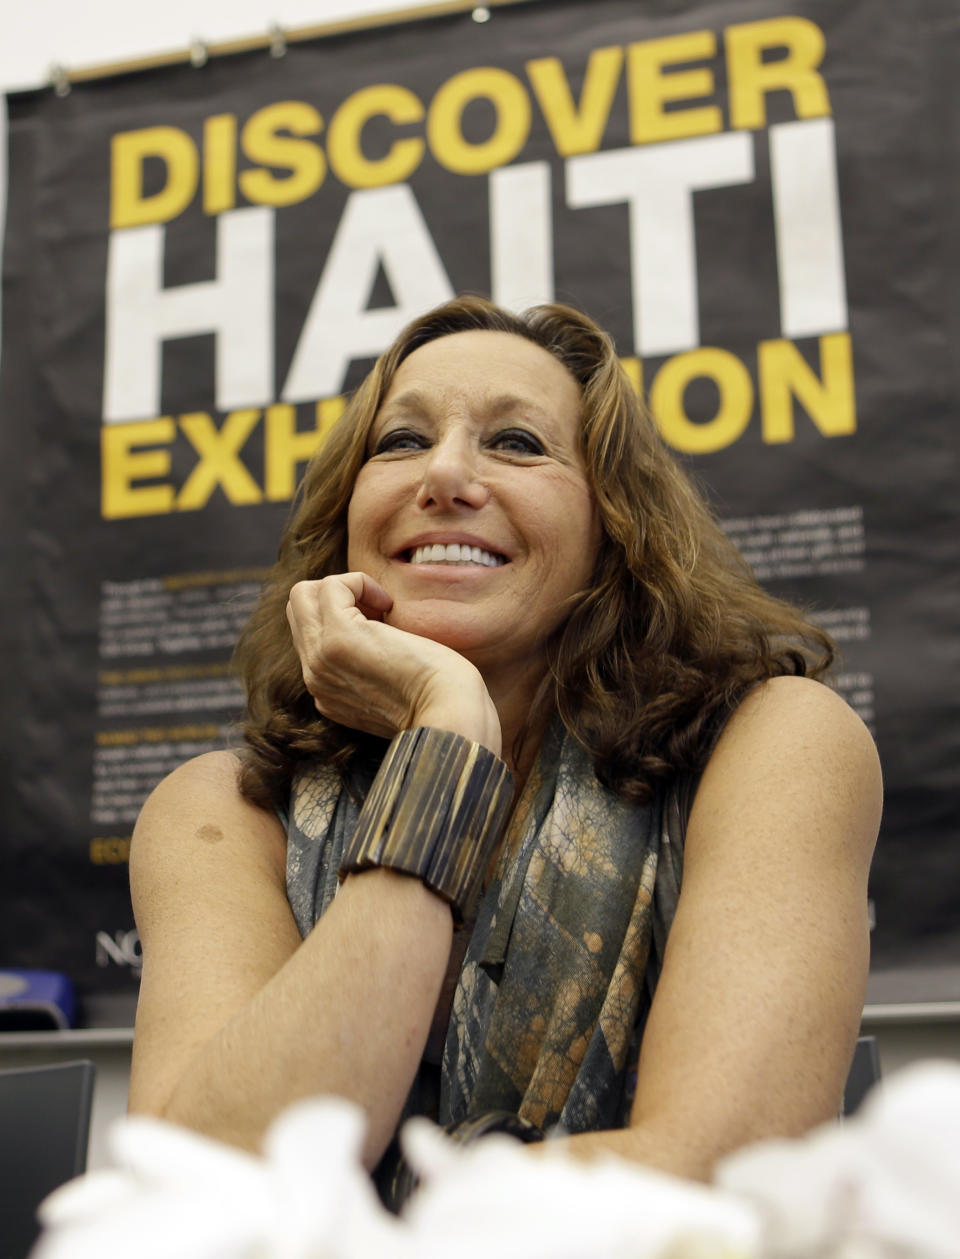 Fashion designer Donna Karan smiles as she talks to guests and visitors at the Little Haiti Cultural Center in Miami, Friday, May 17, 2013. Karan is among the designers and celebrities who have advocated for Haitian artisans since a catastrophic earthquake shook the Caribbean country in 2010. (AP Photo/Alan Diaz)